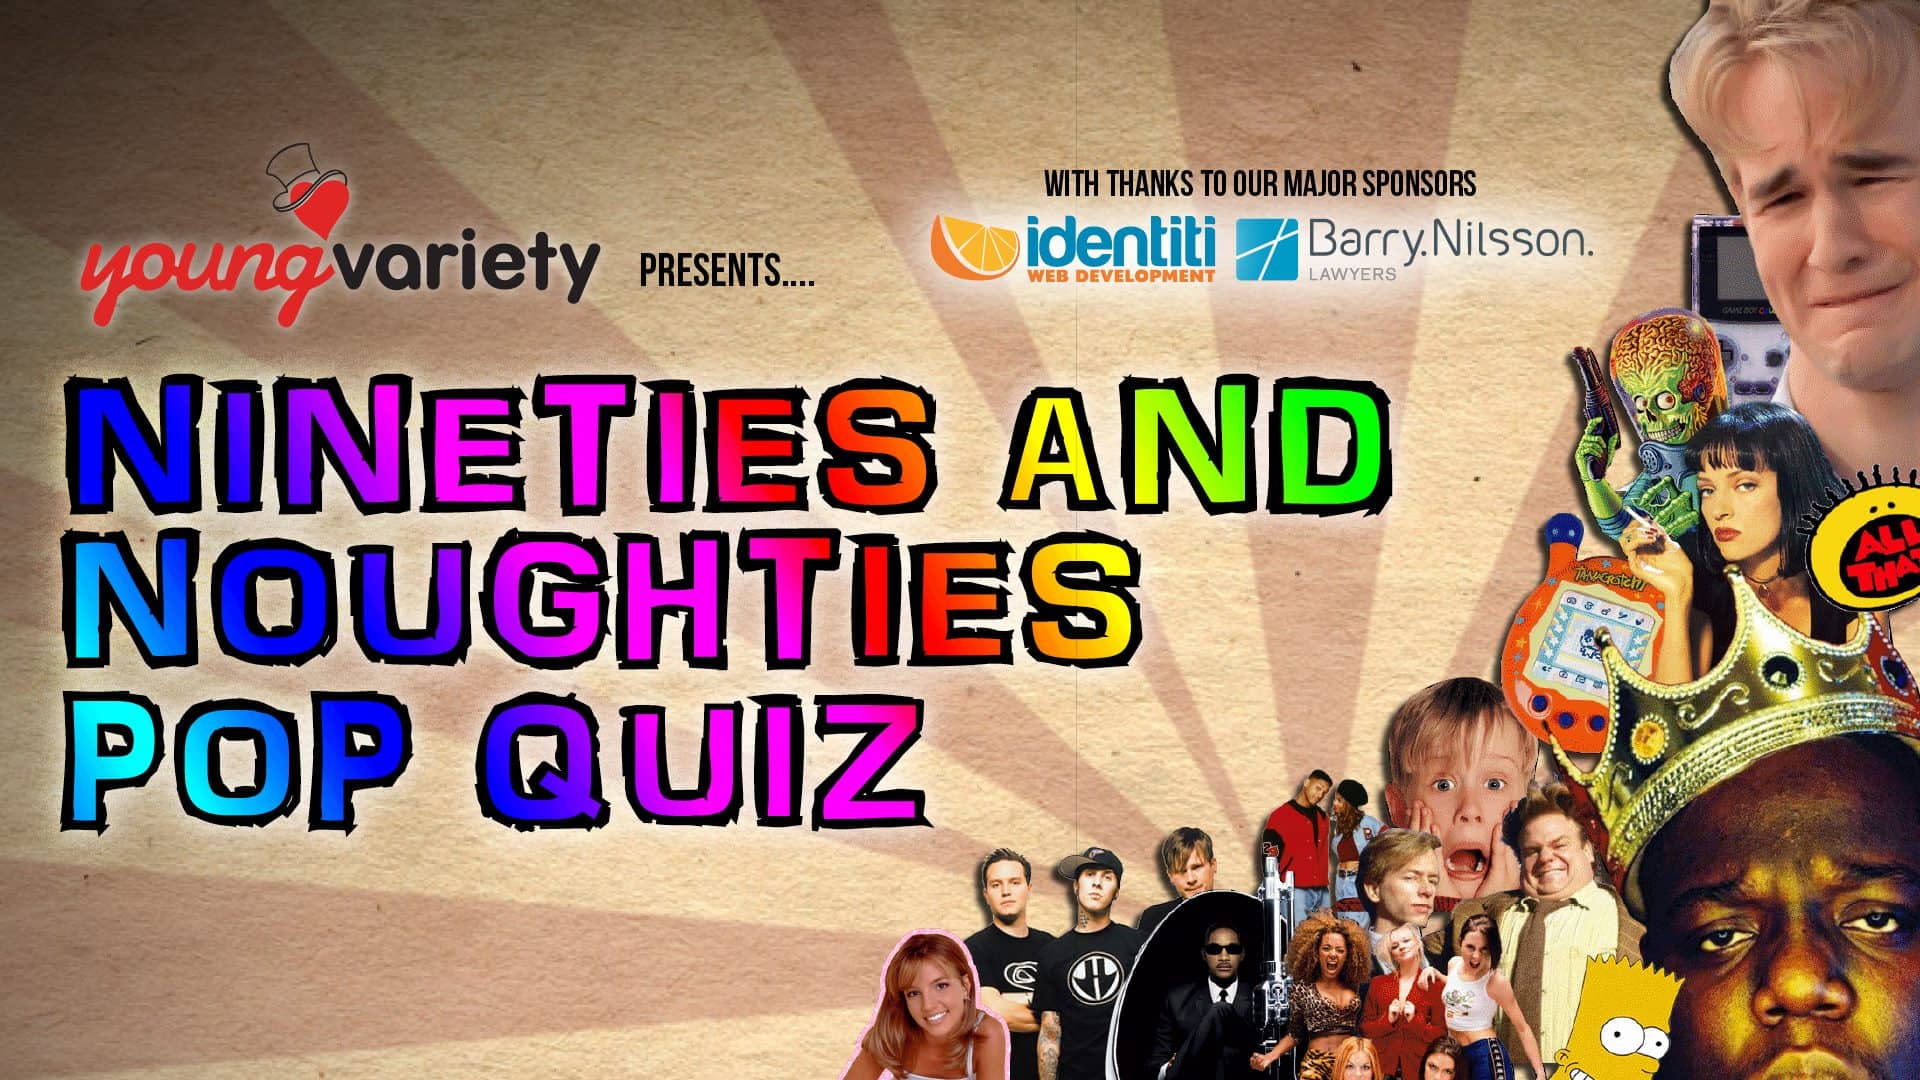 Nineties and Noughties Pop Quiz for Young Variety